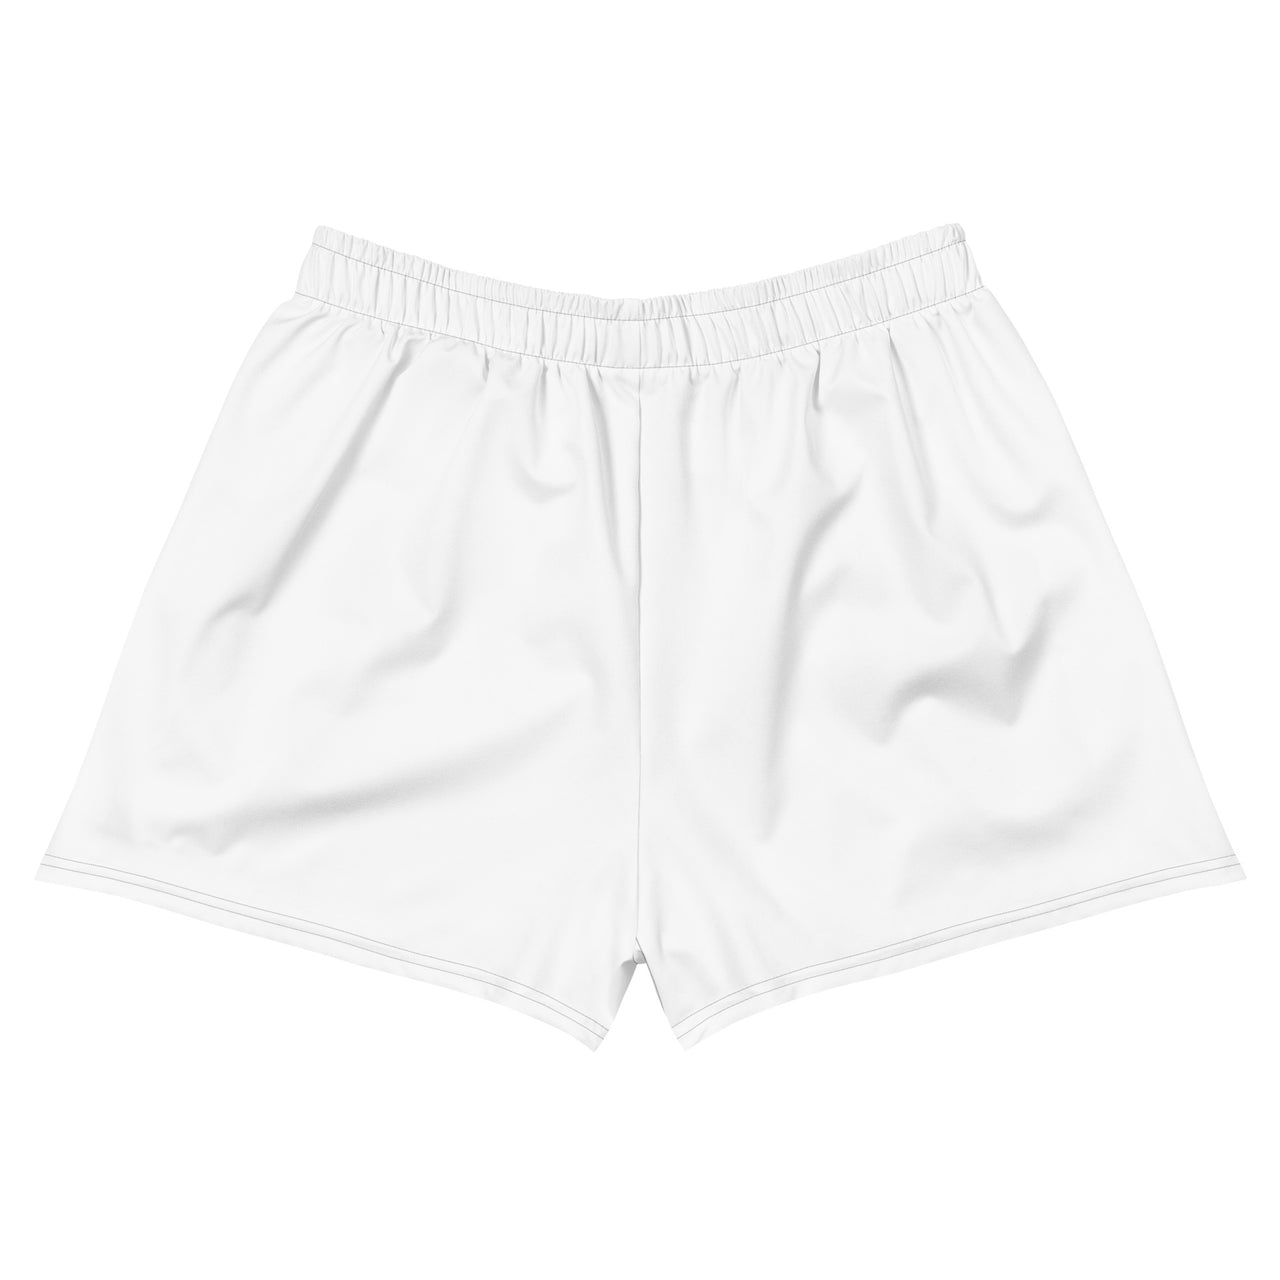 Women’s Recycled Solid Athletic Shorts - White SHAVA CO